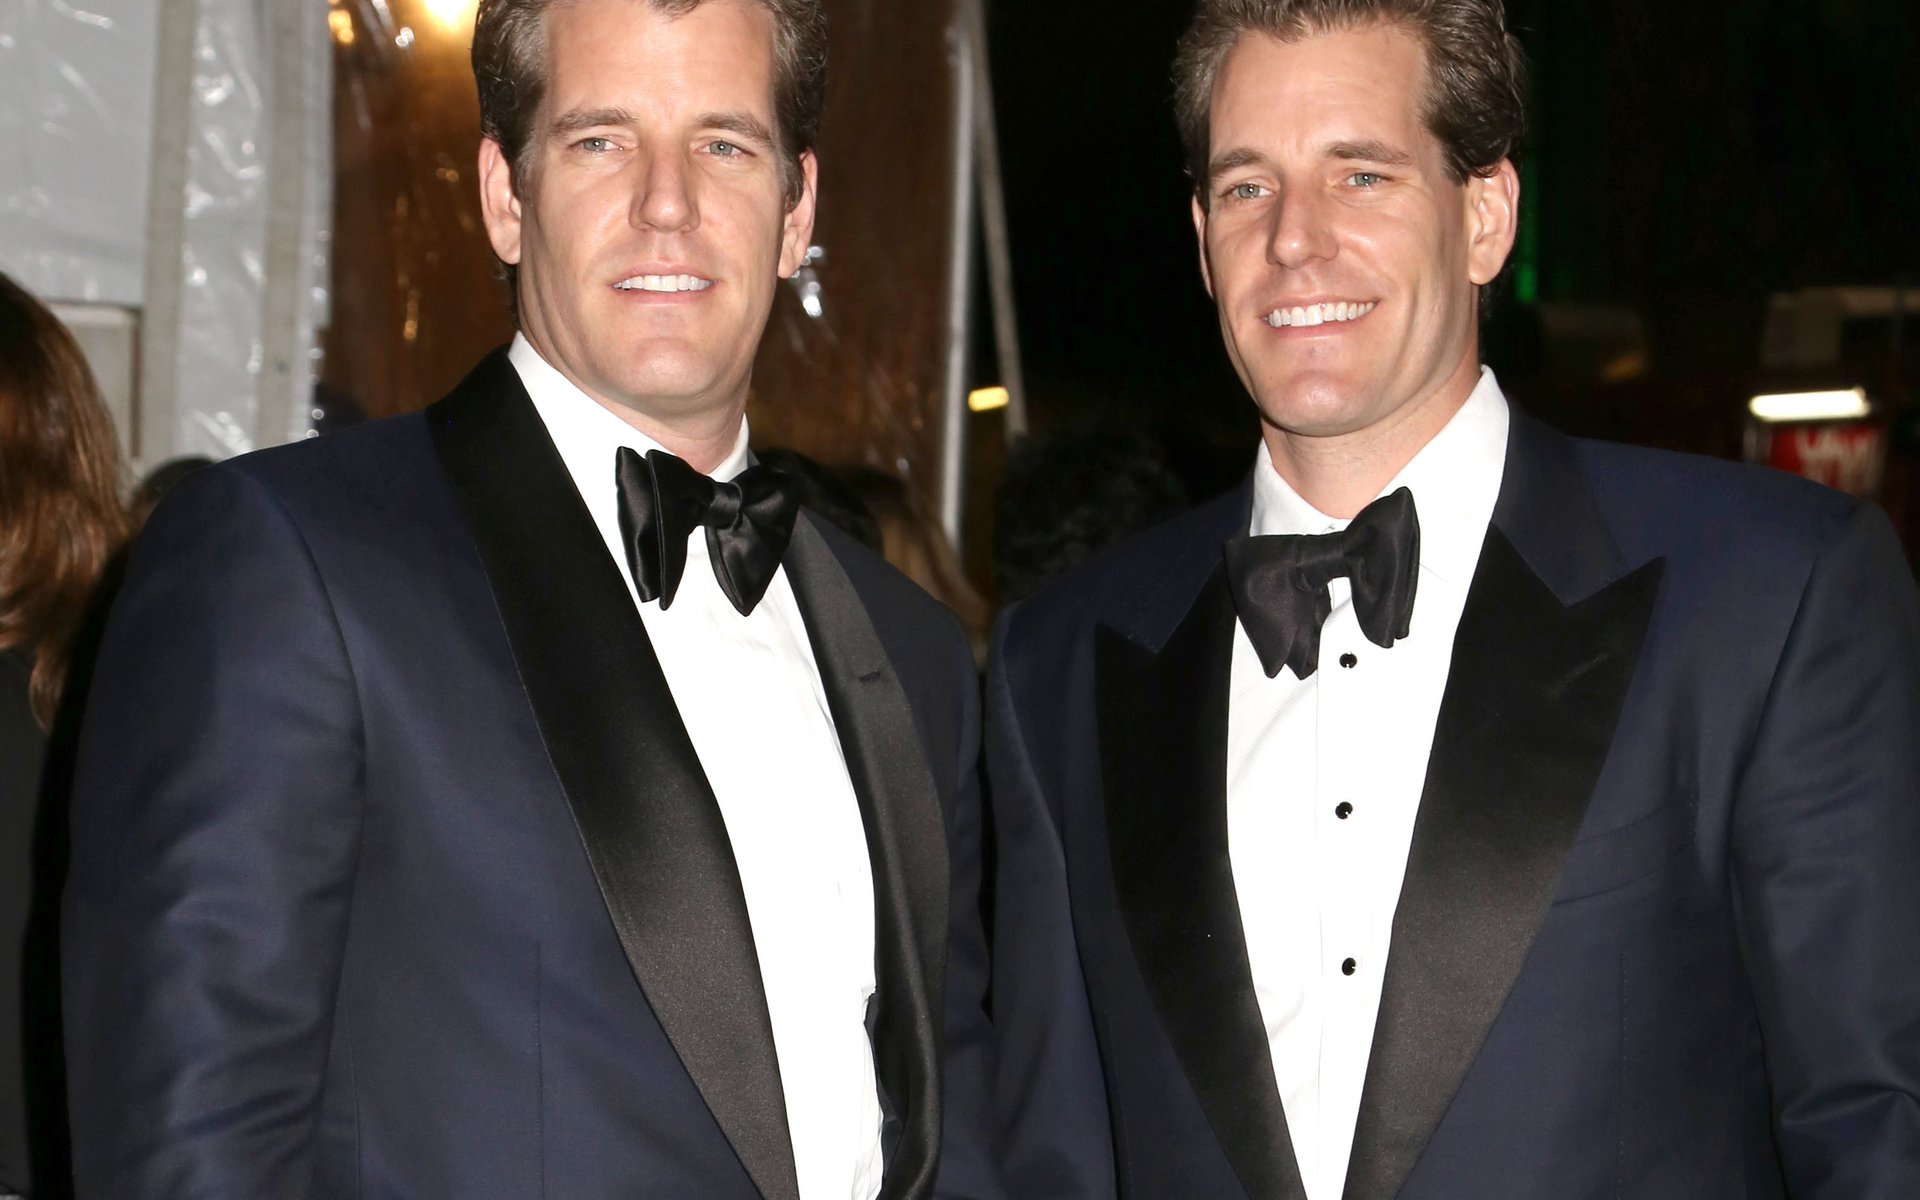 Cameron Winklevoss Predicts 40x Increase for Bitcoin ‘Someday’